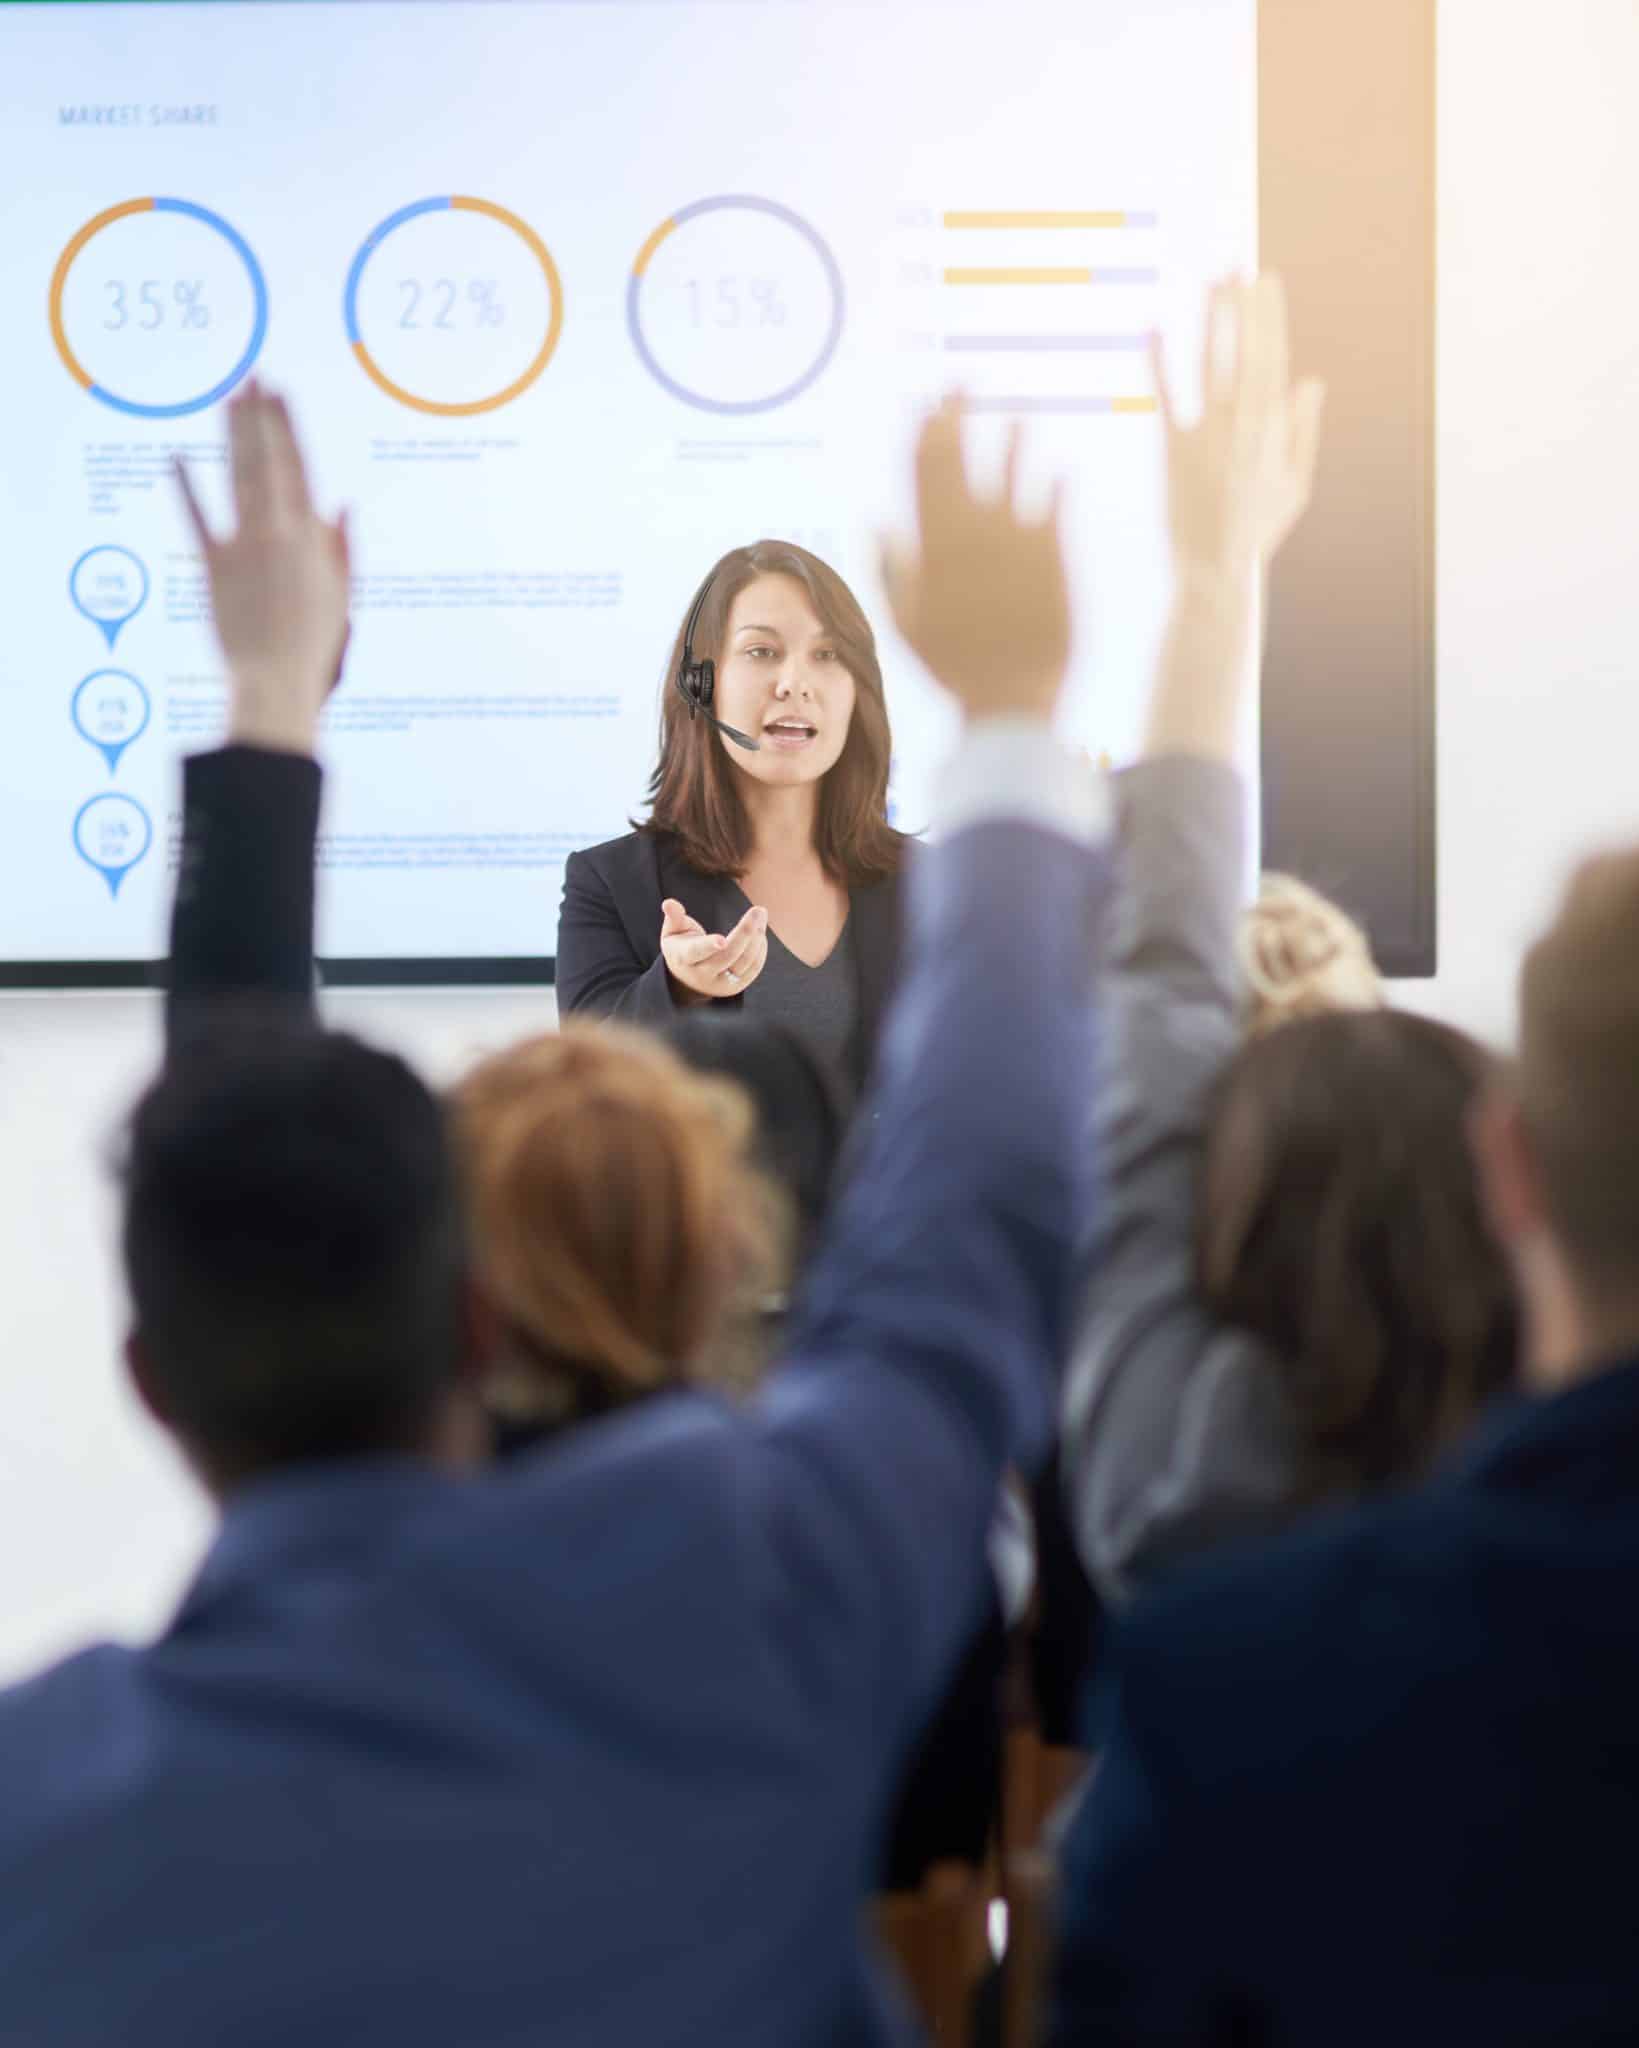 Shot of a group of businesspeople raising their hands in a seminar